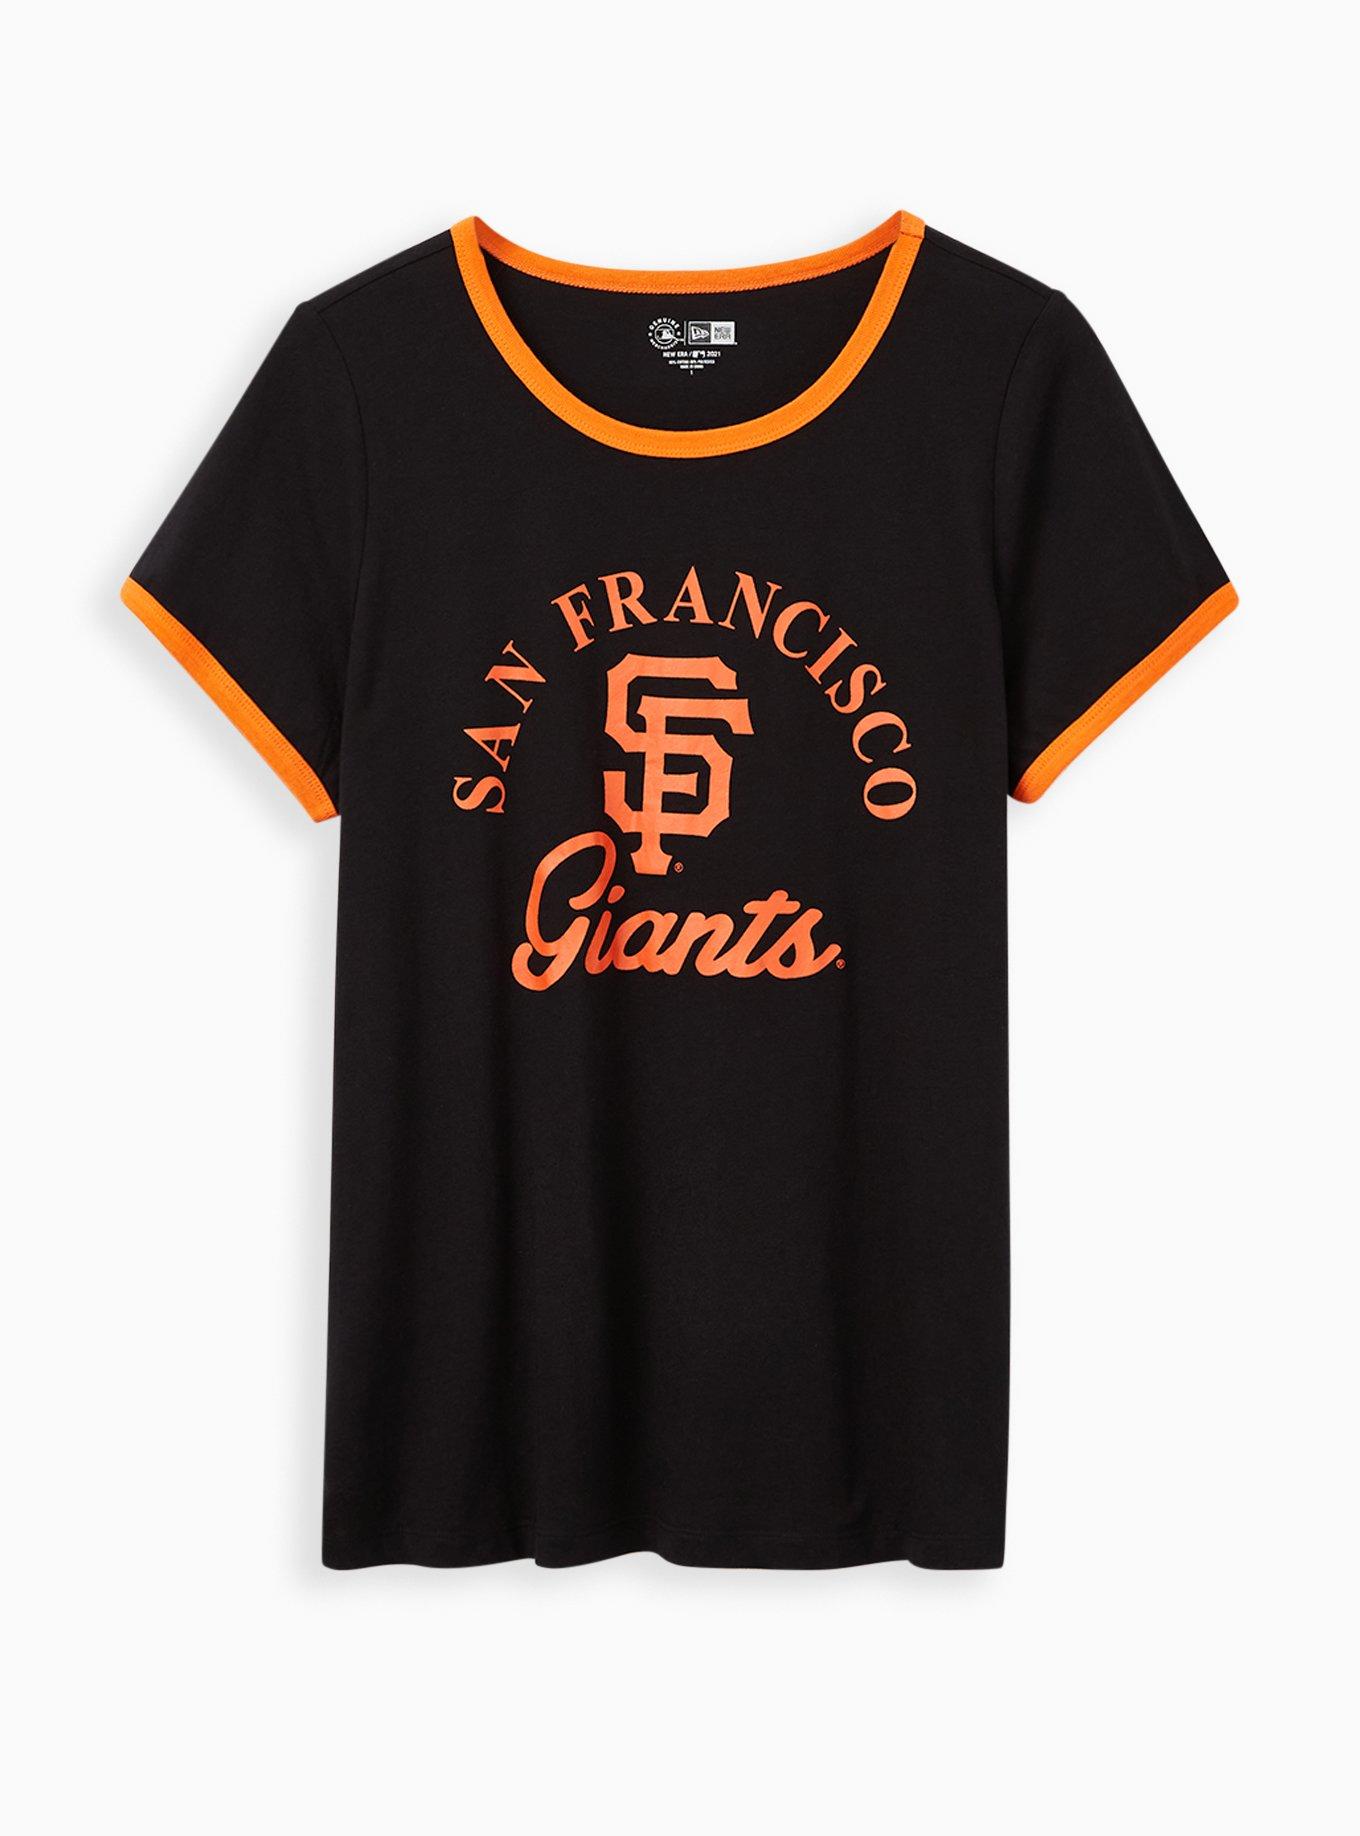 Plus Size - Classic Fit Ringer Tee - MLB San Francisco Giants